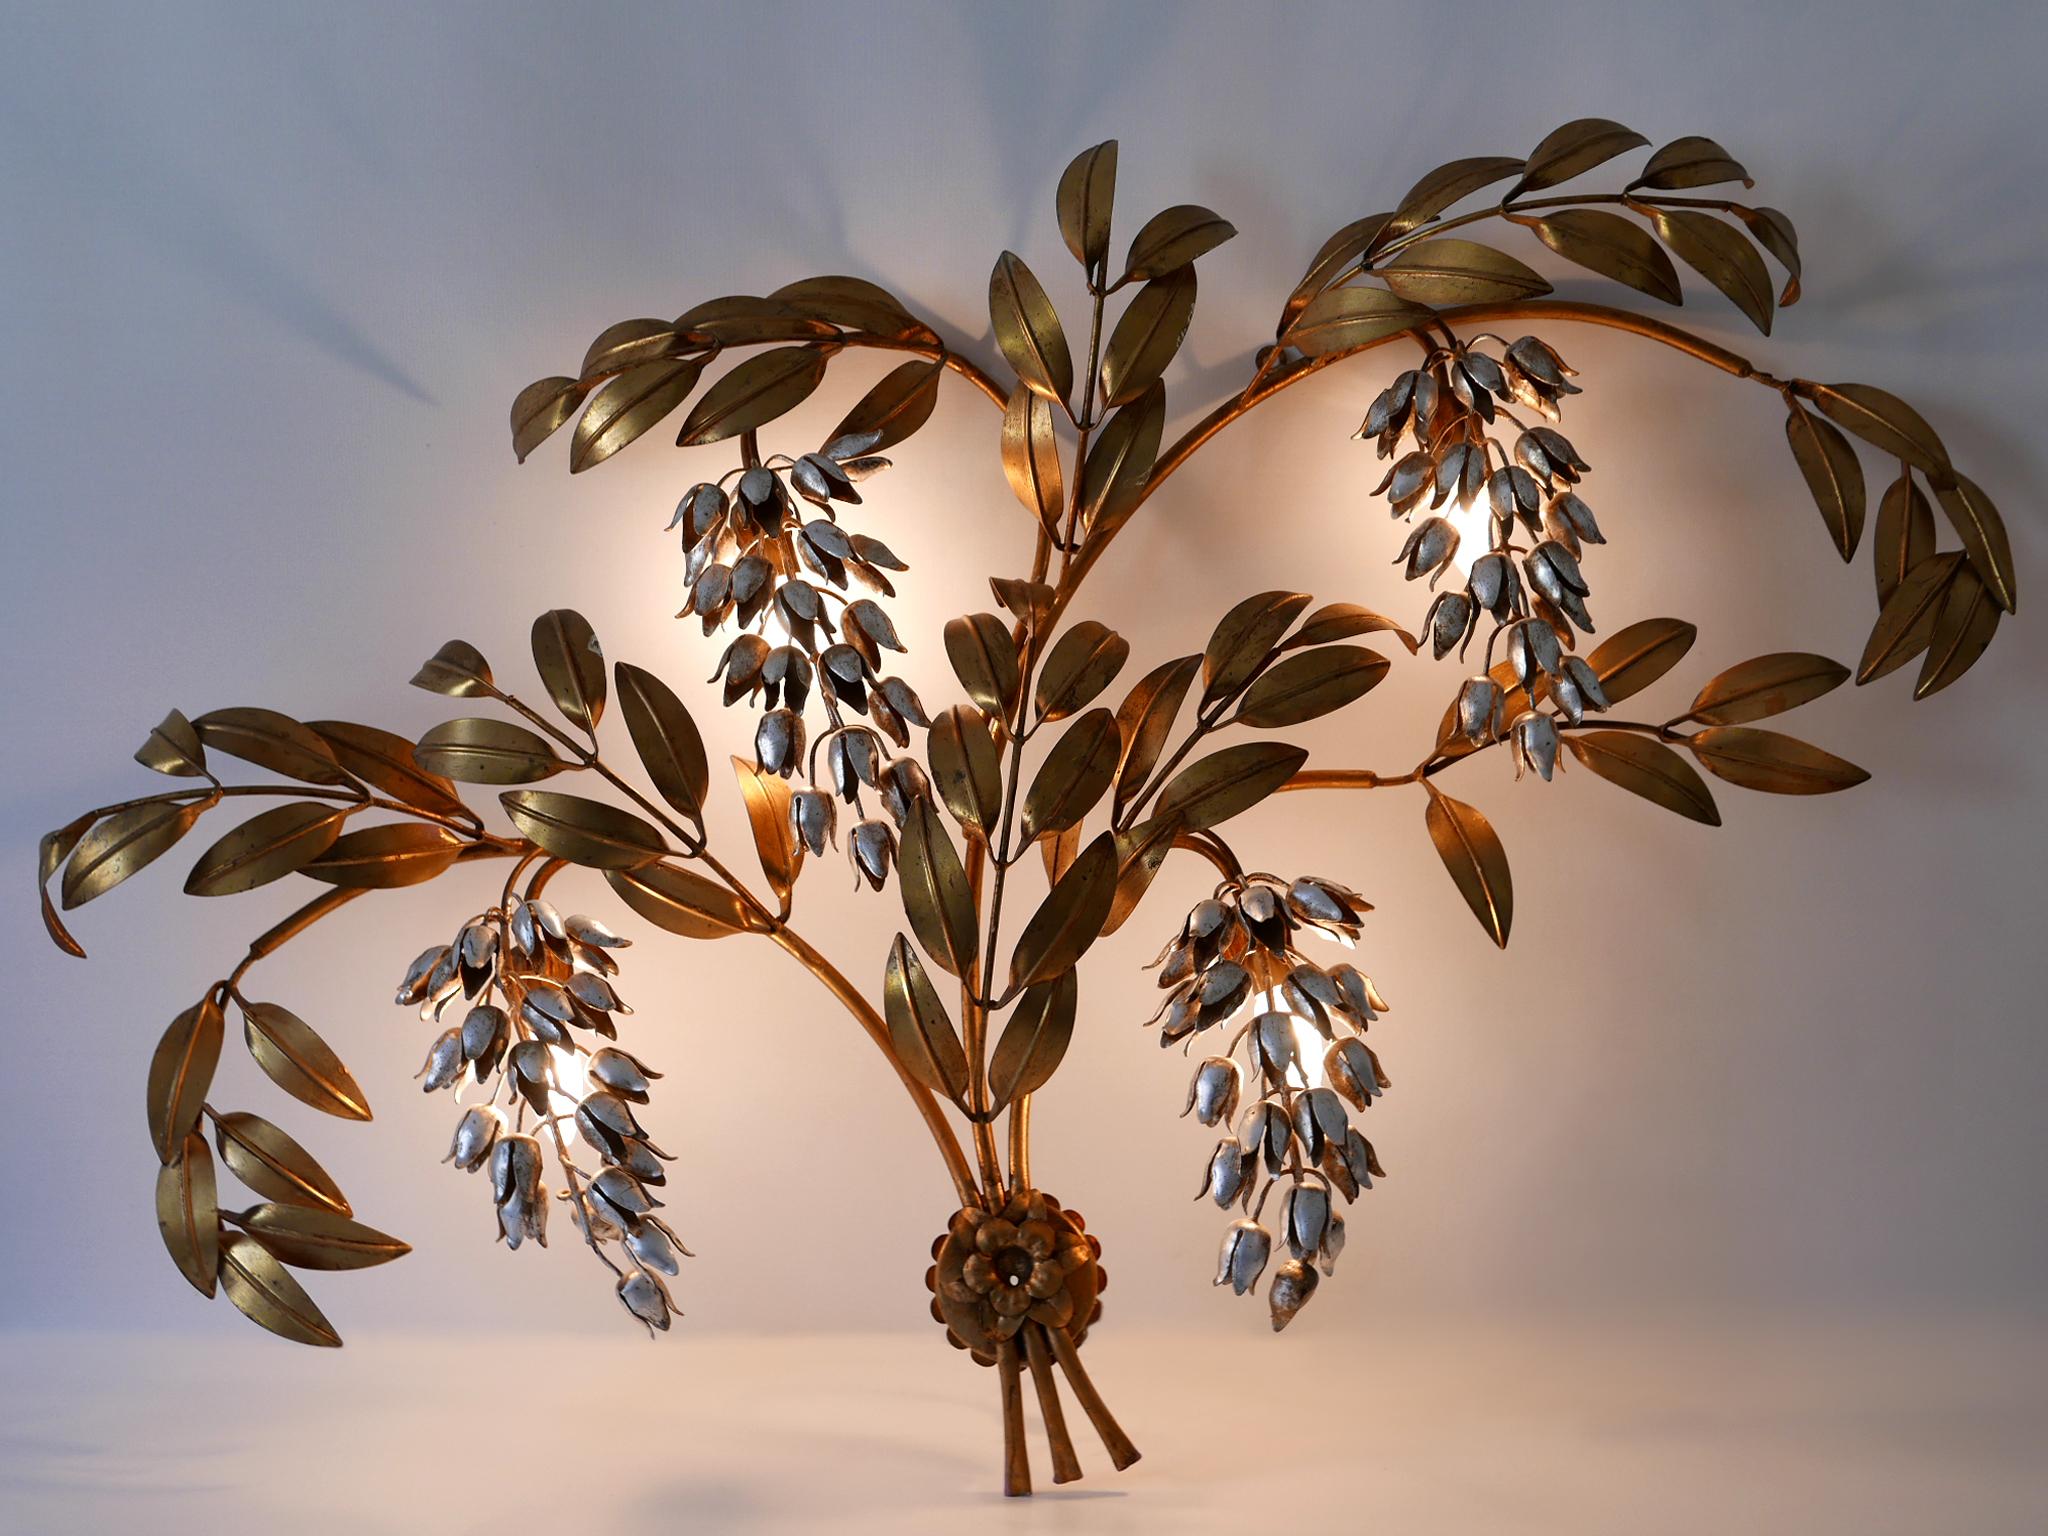 Huge Pioggia d'Oro Gilt Metal Wall Lamp or Sconce by Hans Kögl 1970s Germany For Sale 2